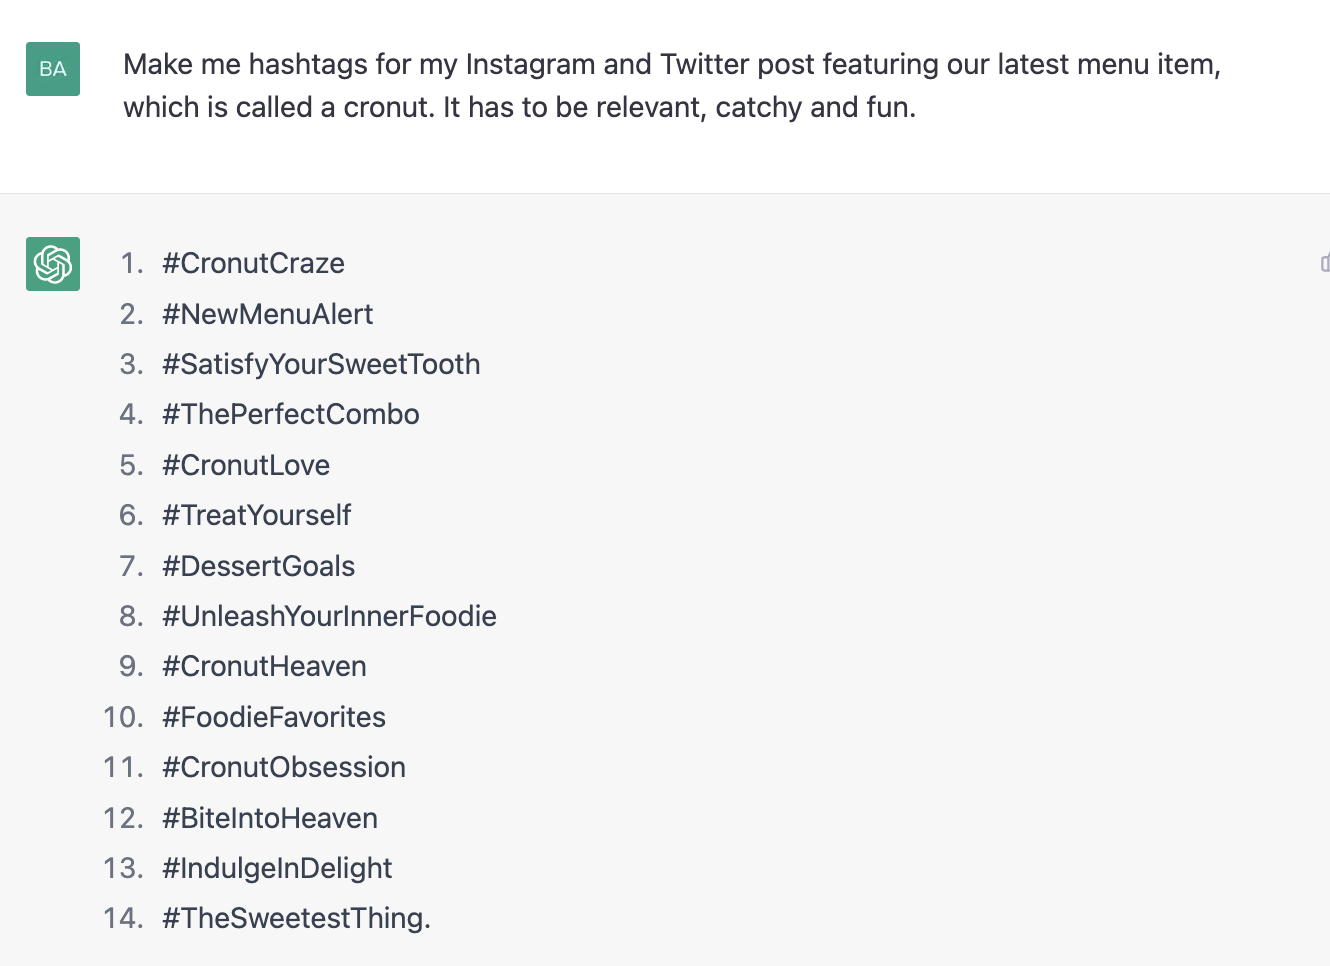 ChatGPT prompt about making hashtags for the post featuring a menu item